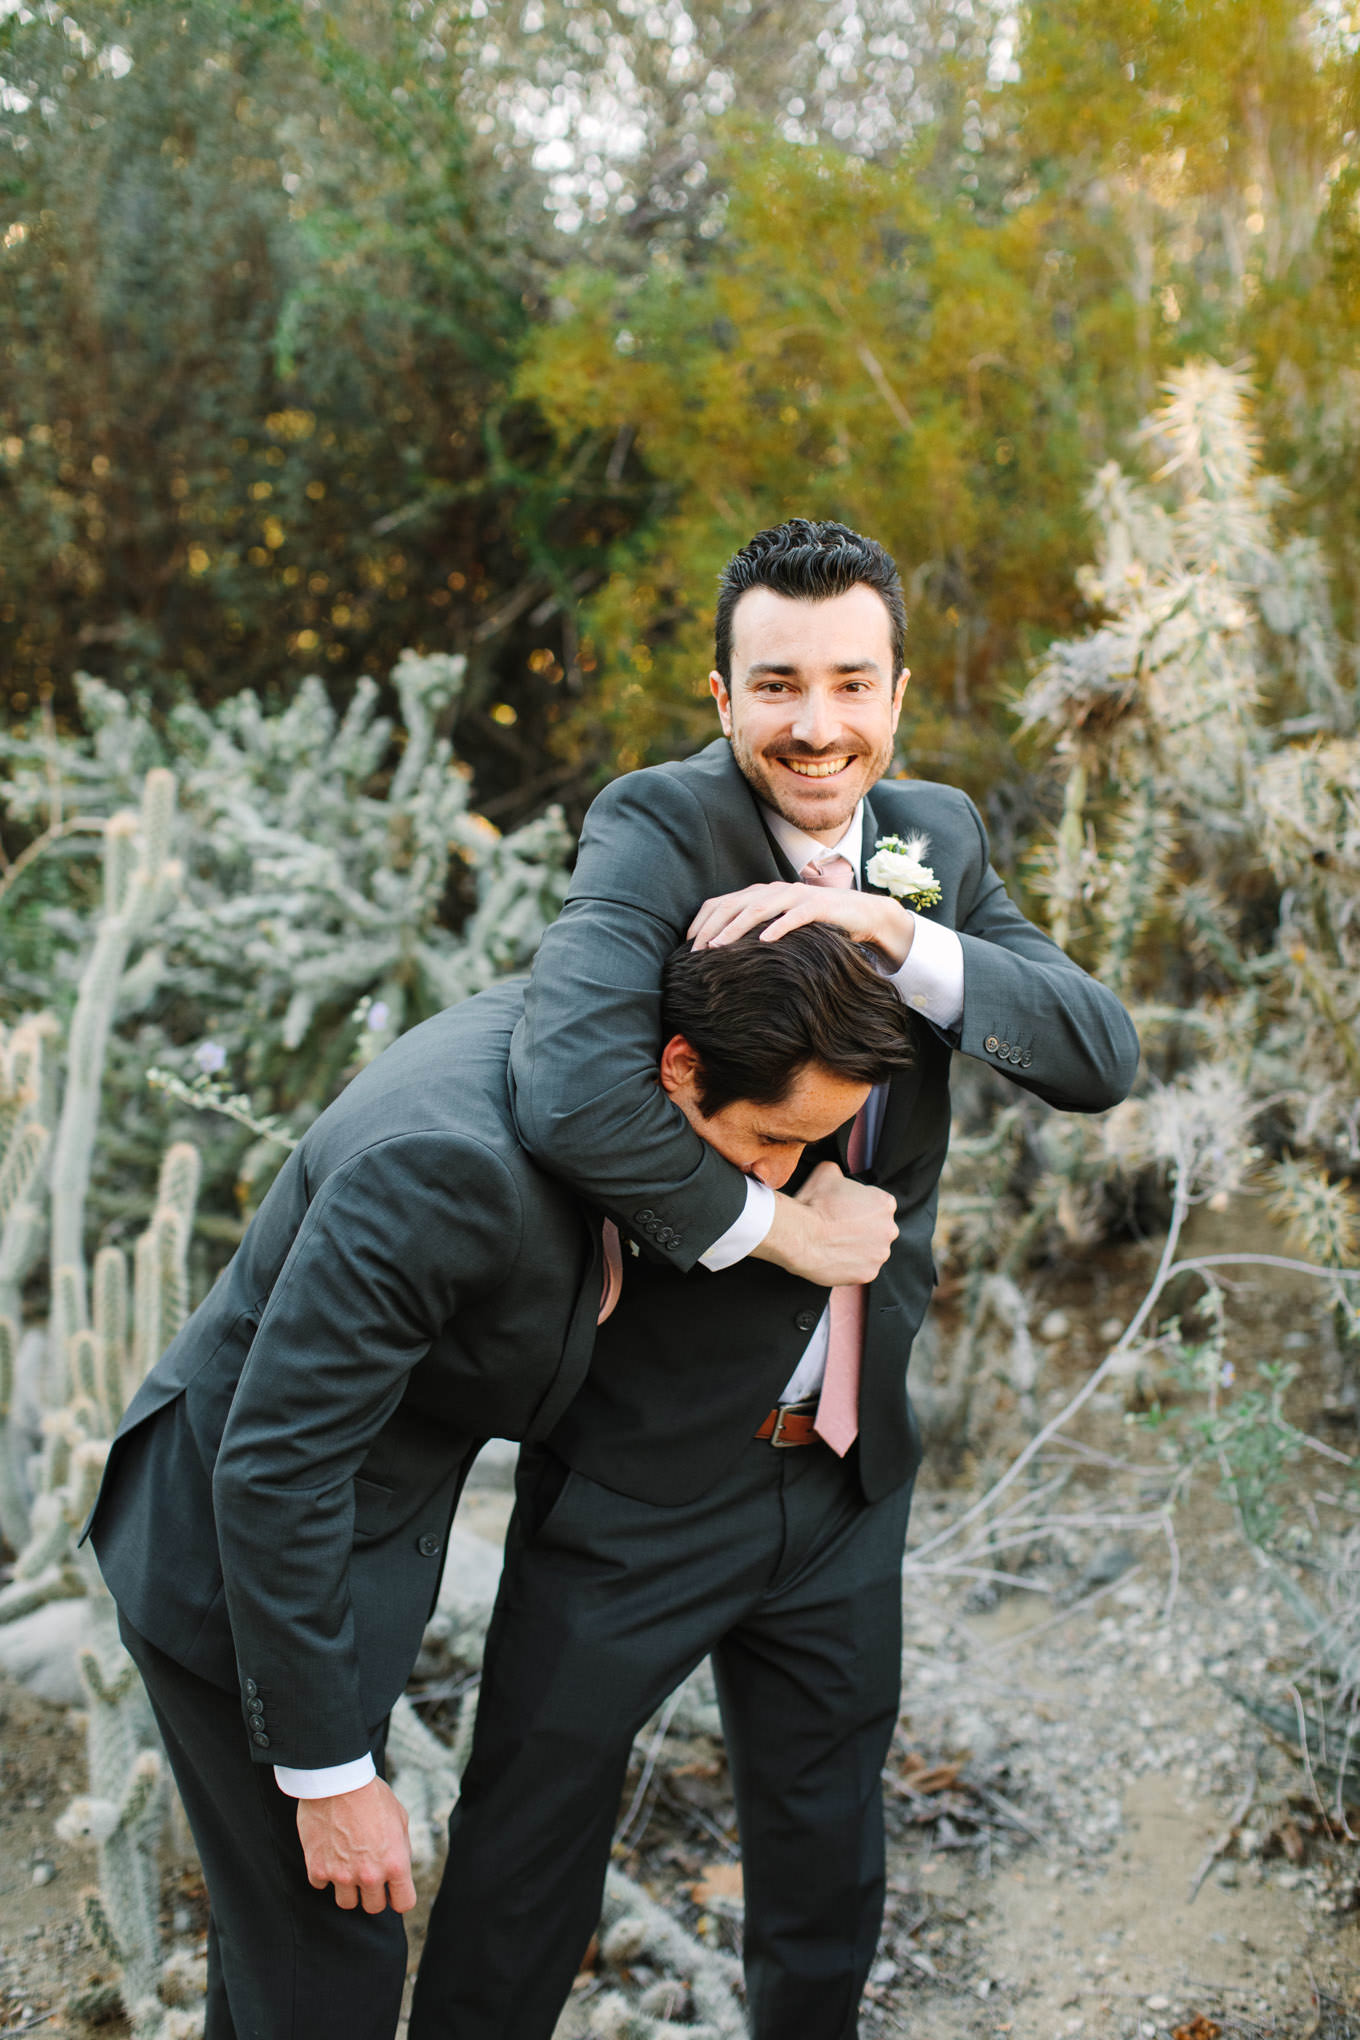 Groom and groomsman fun portrait | Living Desert Zoo & Gardens wedding with unique details | Elevated and colorful wedding photography for fun-loving couples in Southern California |  #PalmSprings #palmspringsphotographer #gardenwedding #palmspringswedding  Source: Mary Costa Photography | Los Angeles wedding photographer 